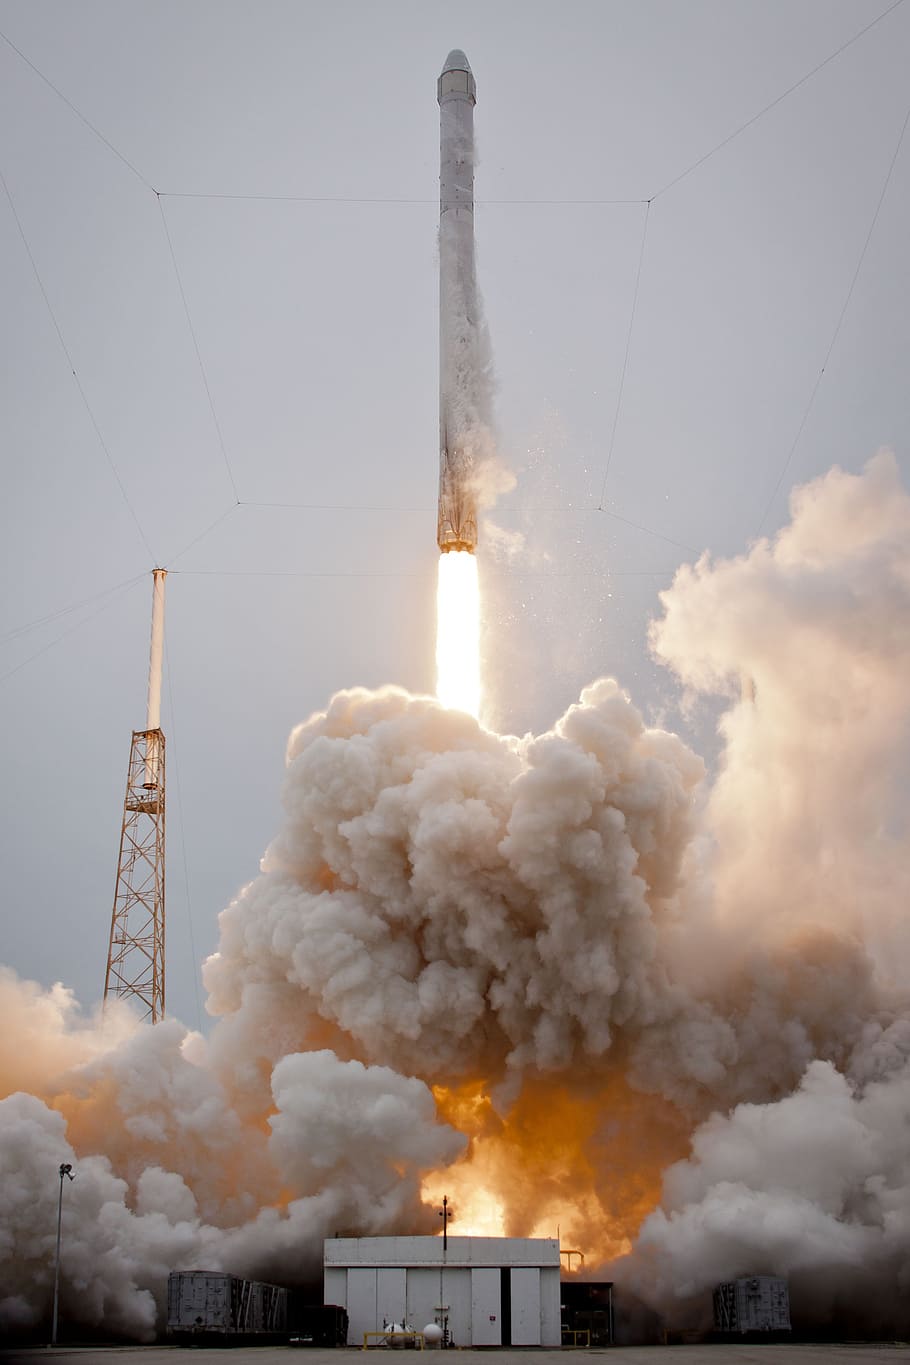 rocket launch during daytime, spacex, lift-off, flames, propulsion, HD wallpaper